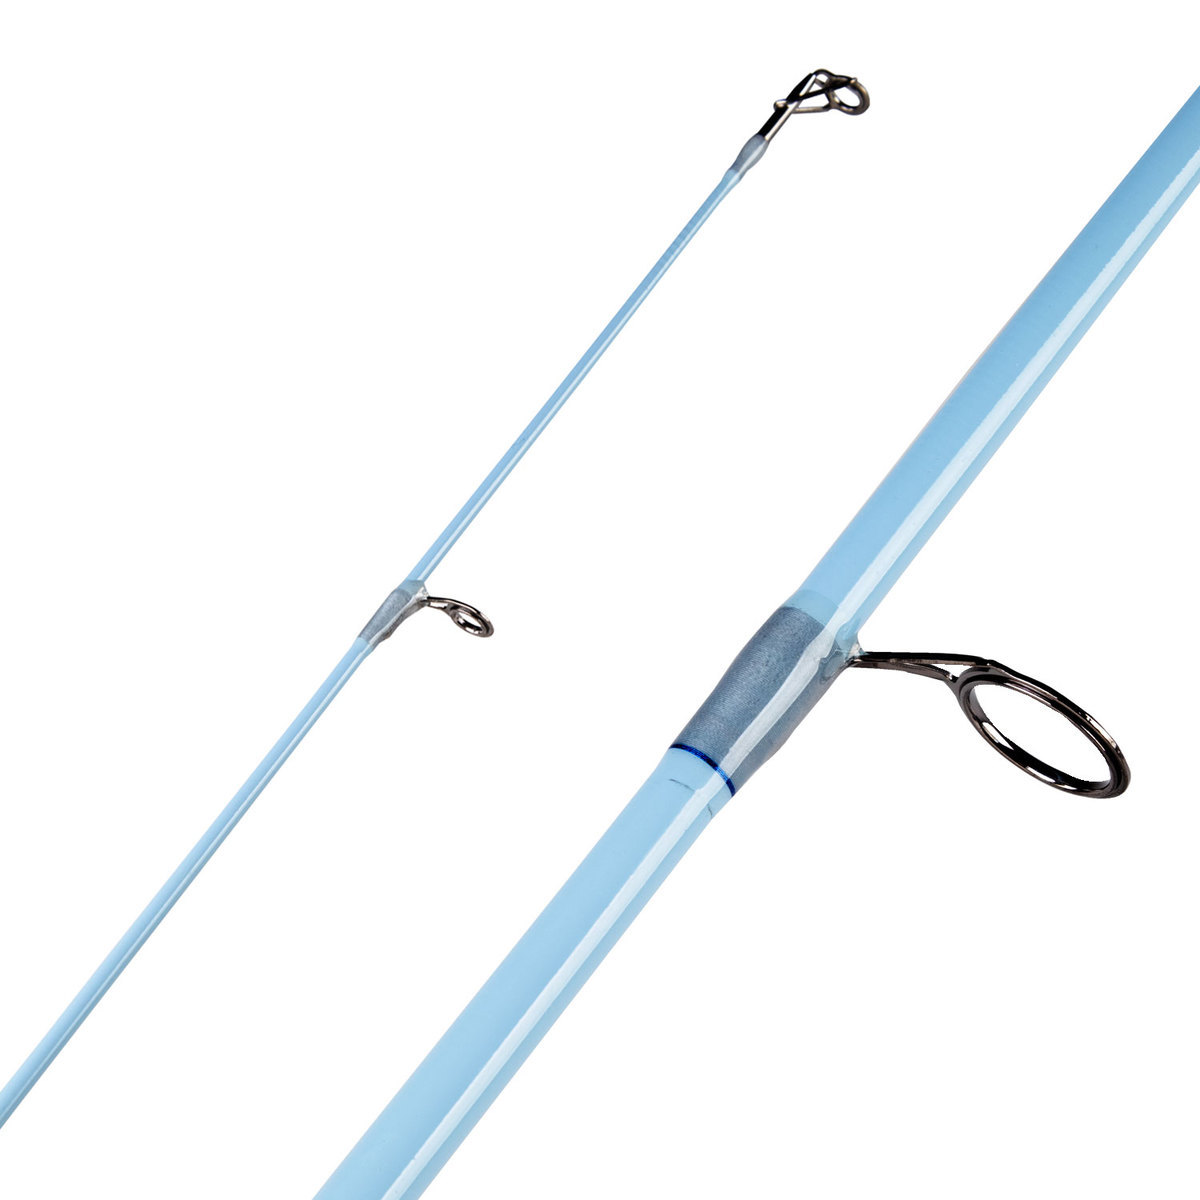 Pflueger Lady Trion Spinning Combo - 6ft 6in, Medium, 2pc - Blue/Silver 35 | Sportsman's Warehouse